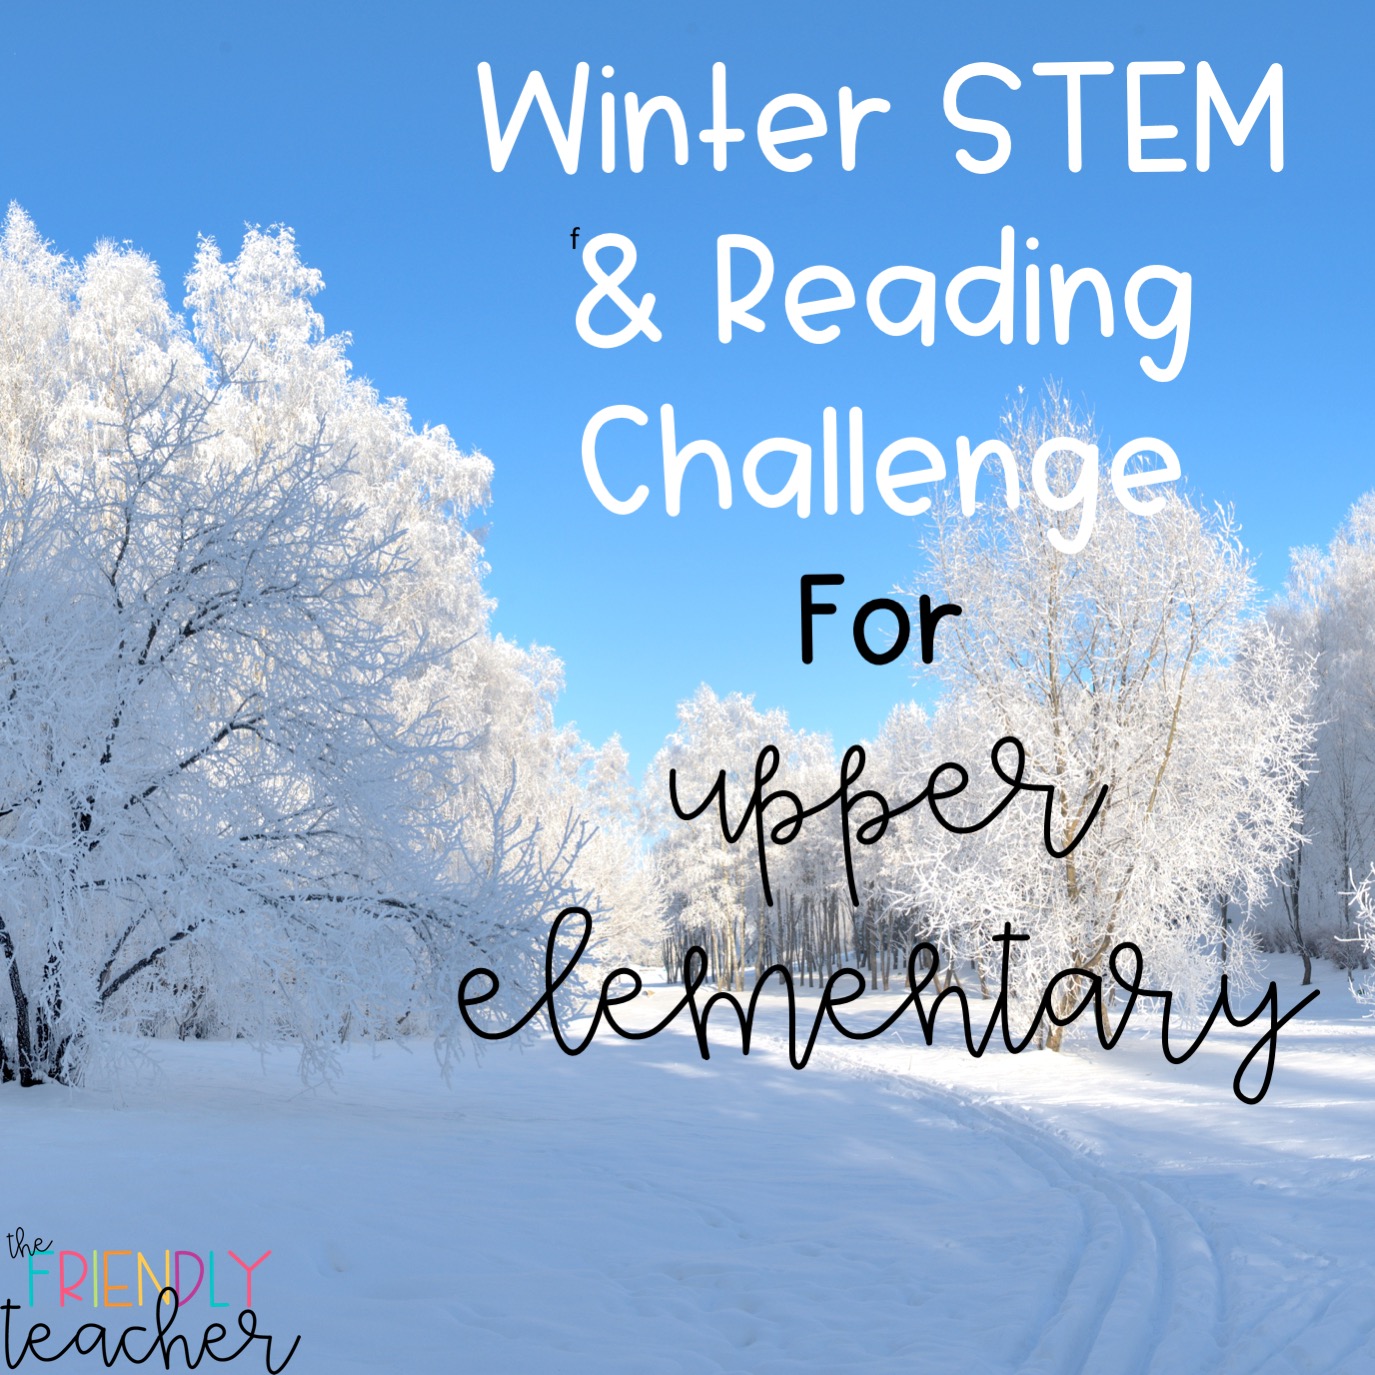 Winter Reading and Stem Challenge for Upper Elementary